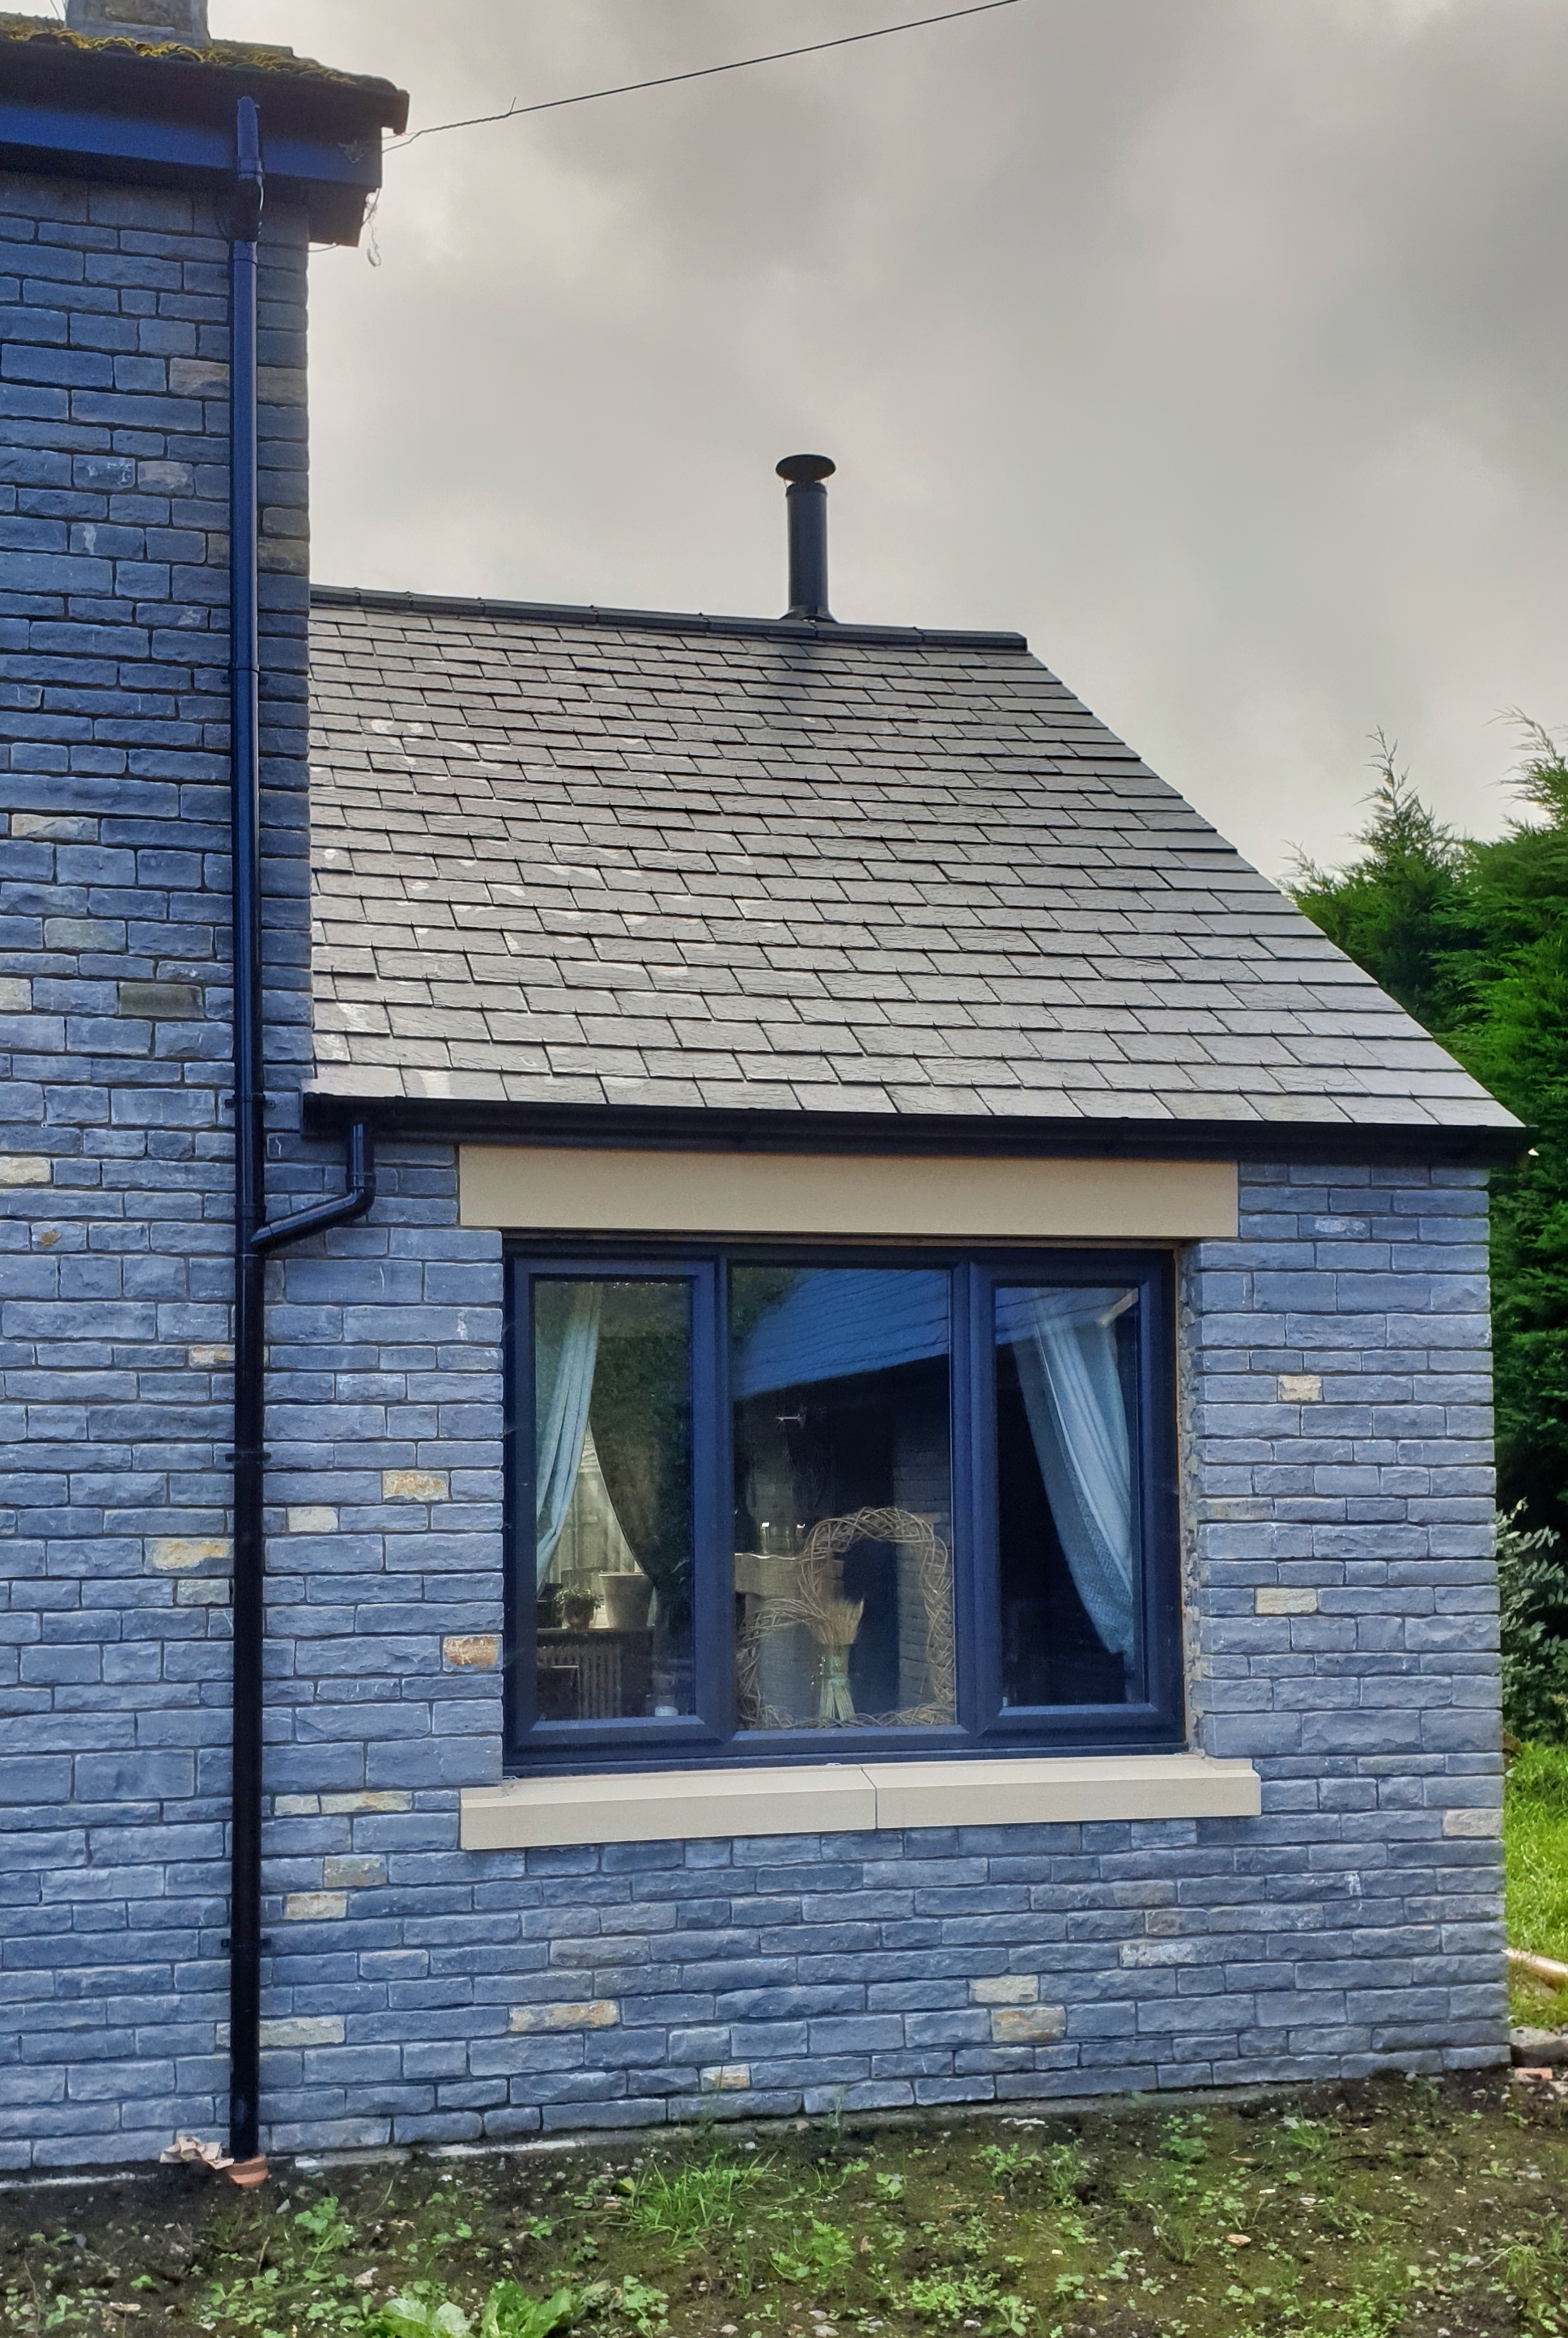 Blue Lias stone and slate roof, side extension.